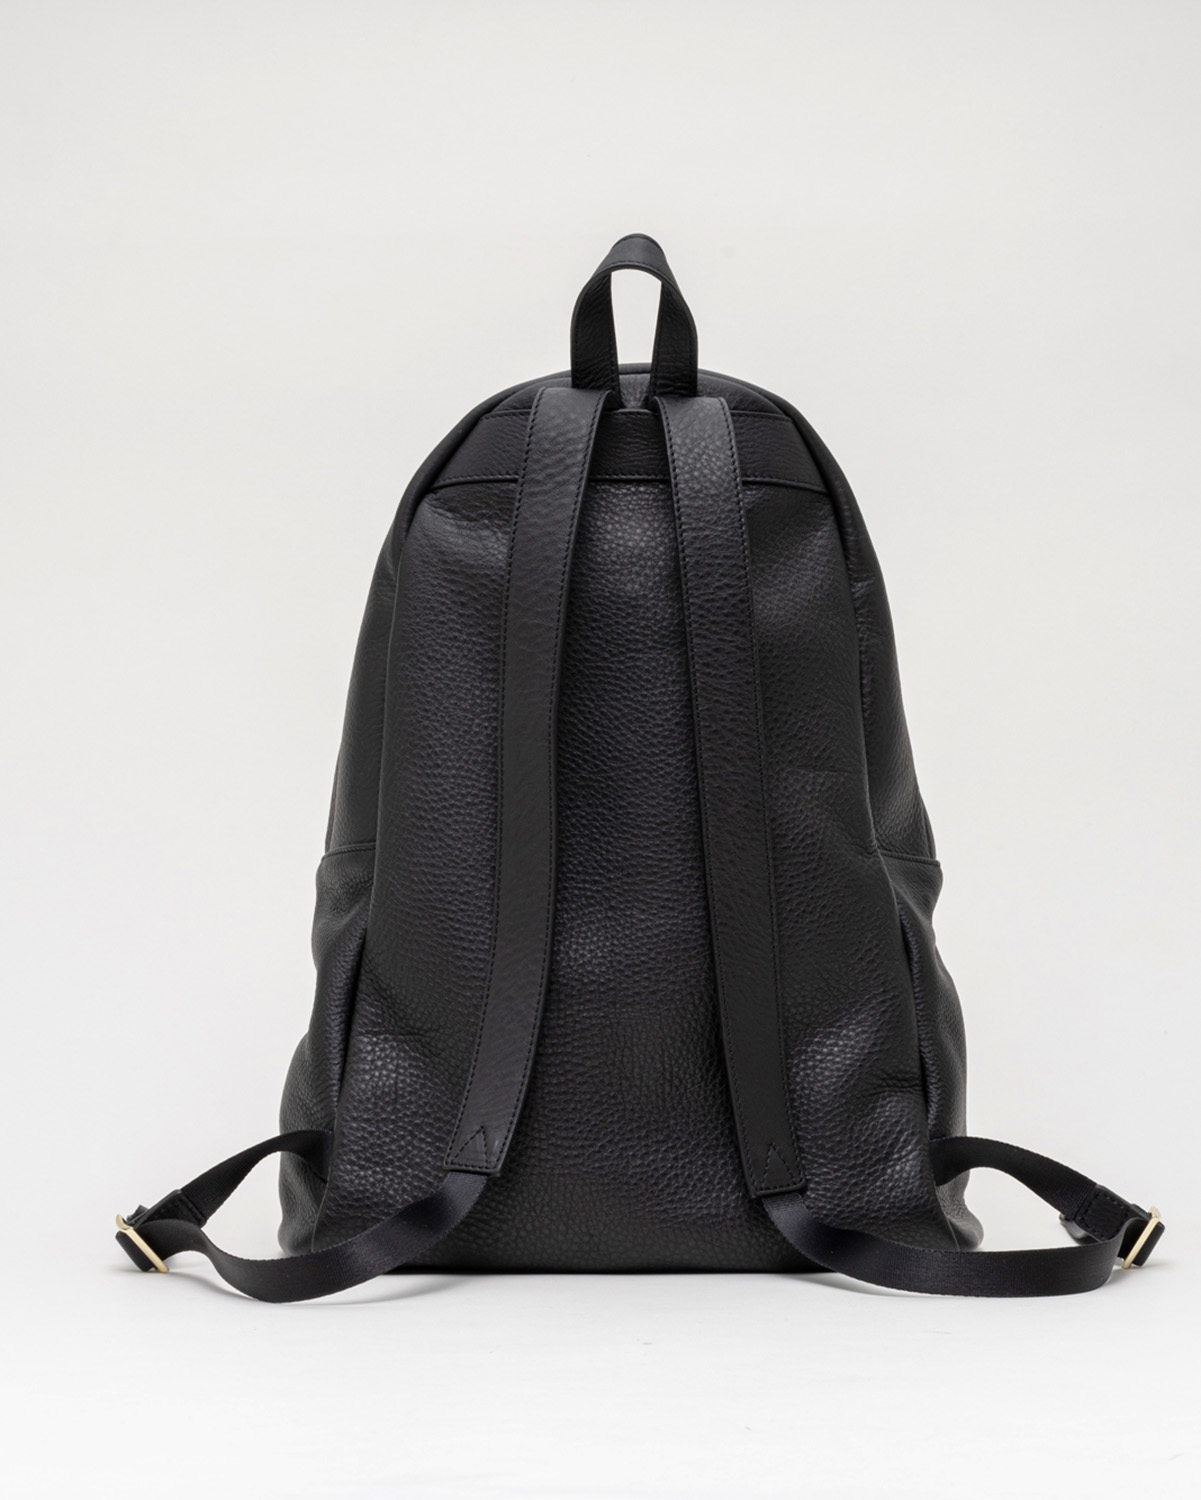 DAY PACK - S.MANO